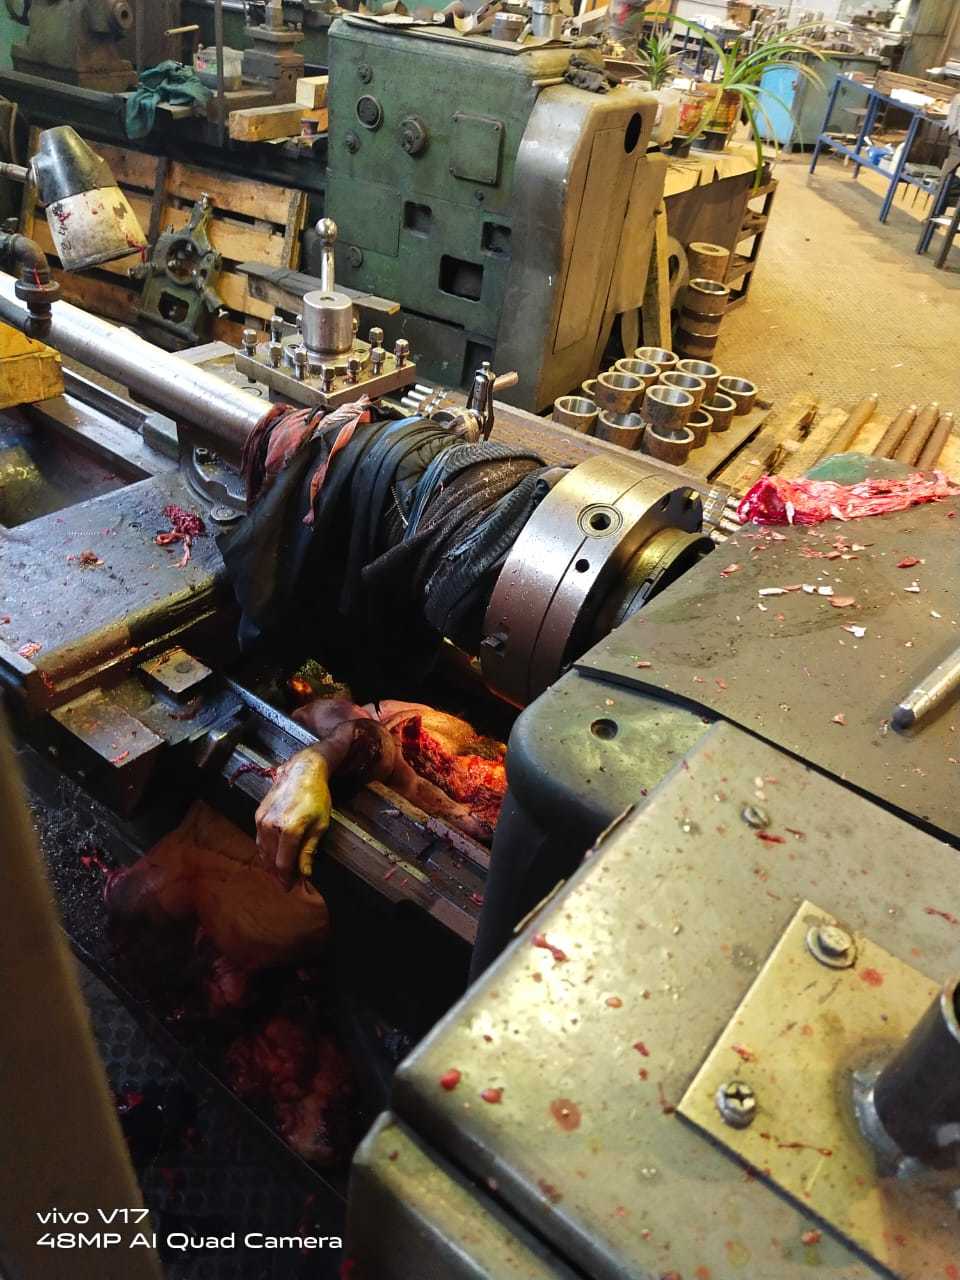 THE AFTERMATH OF THAT INSANE LATHE ACCIDENT IN RUSSIA